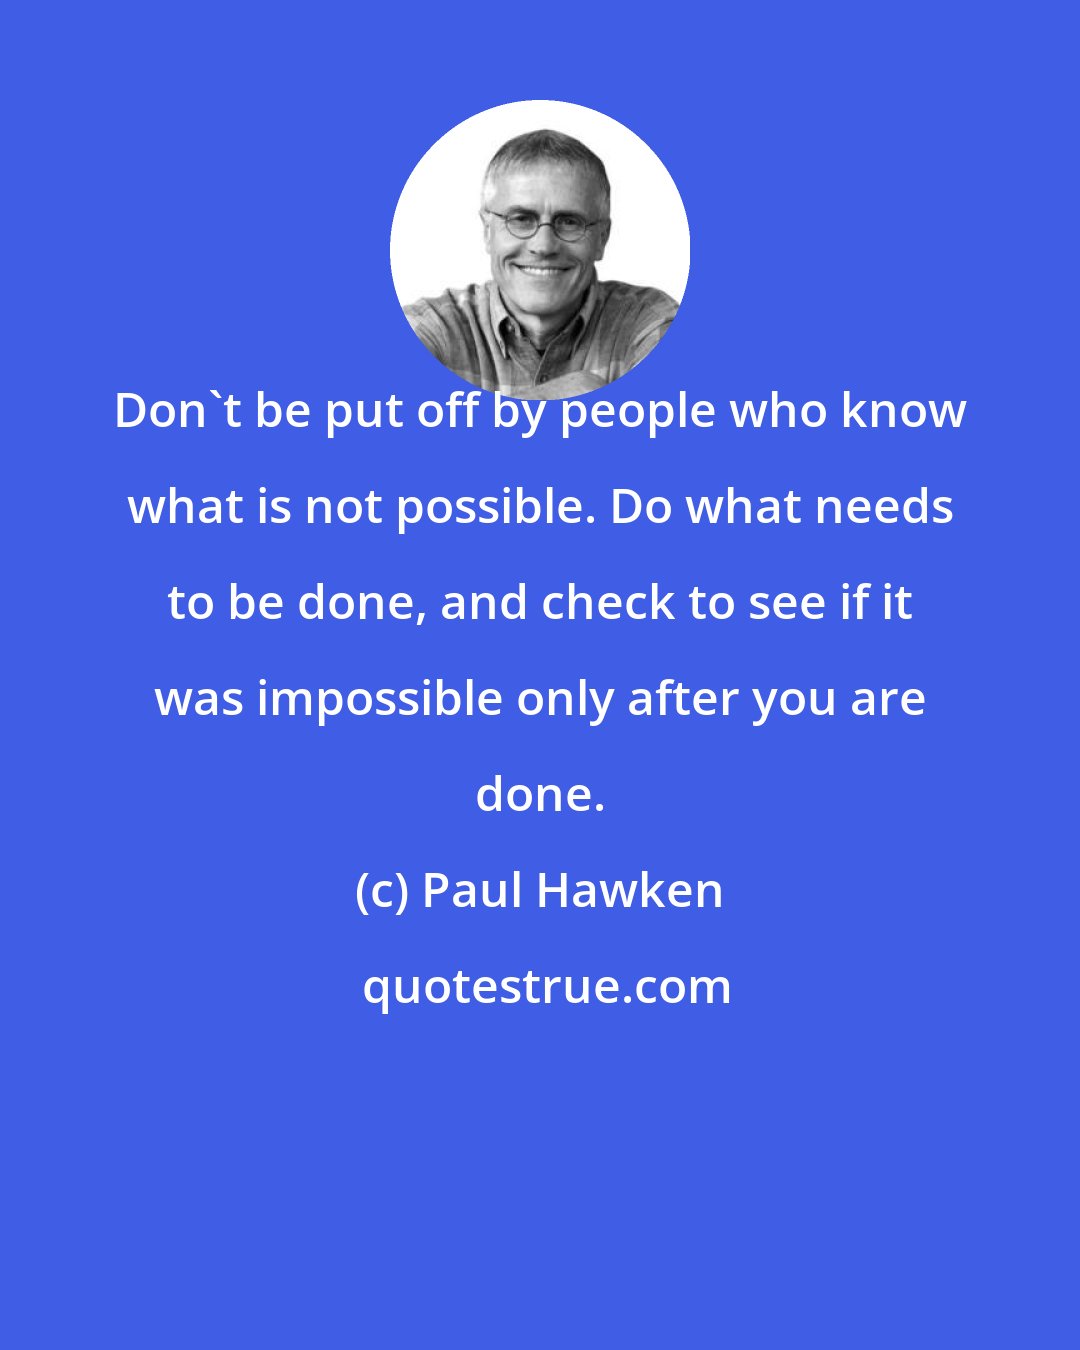 Paul Hawken: Don't be put off by people who know what is not possible. Do what needs to be done, and check to see if it was impossible only after you are done.